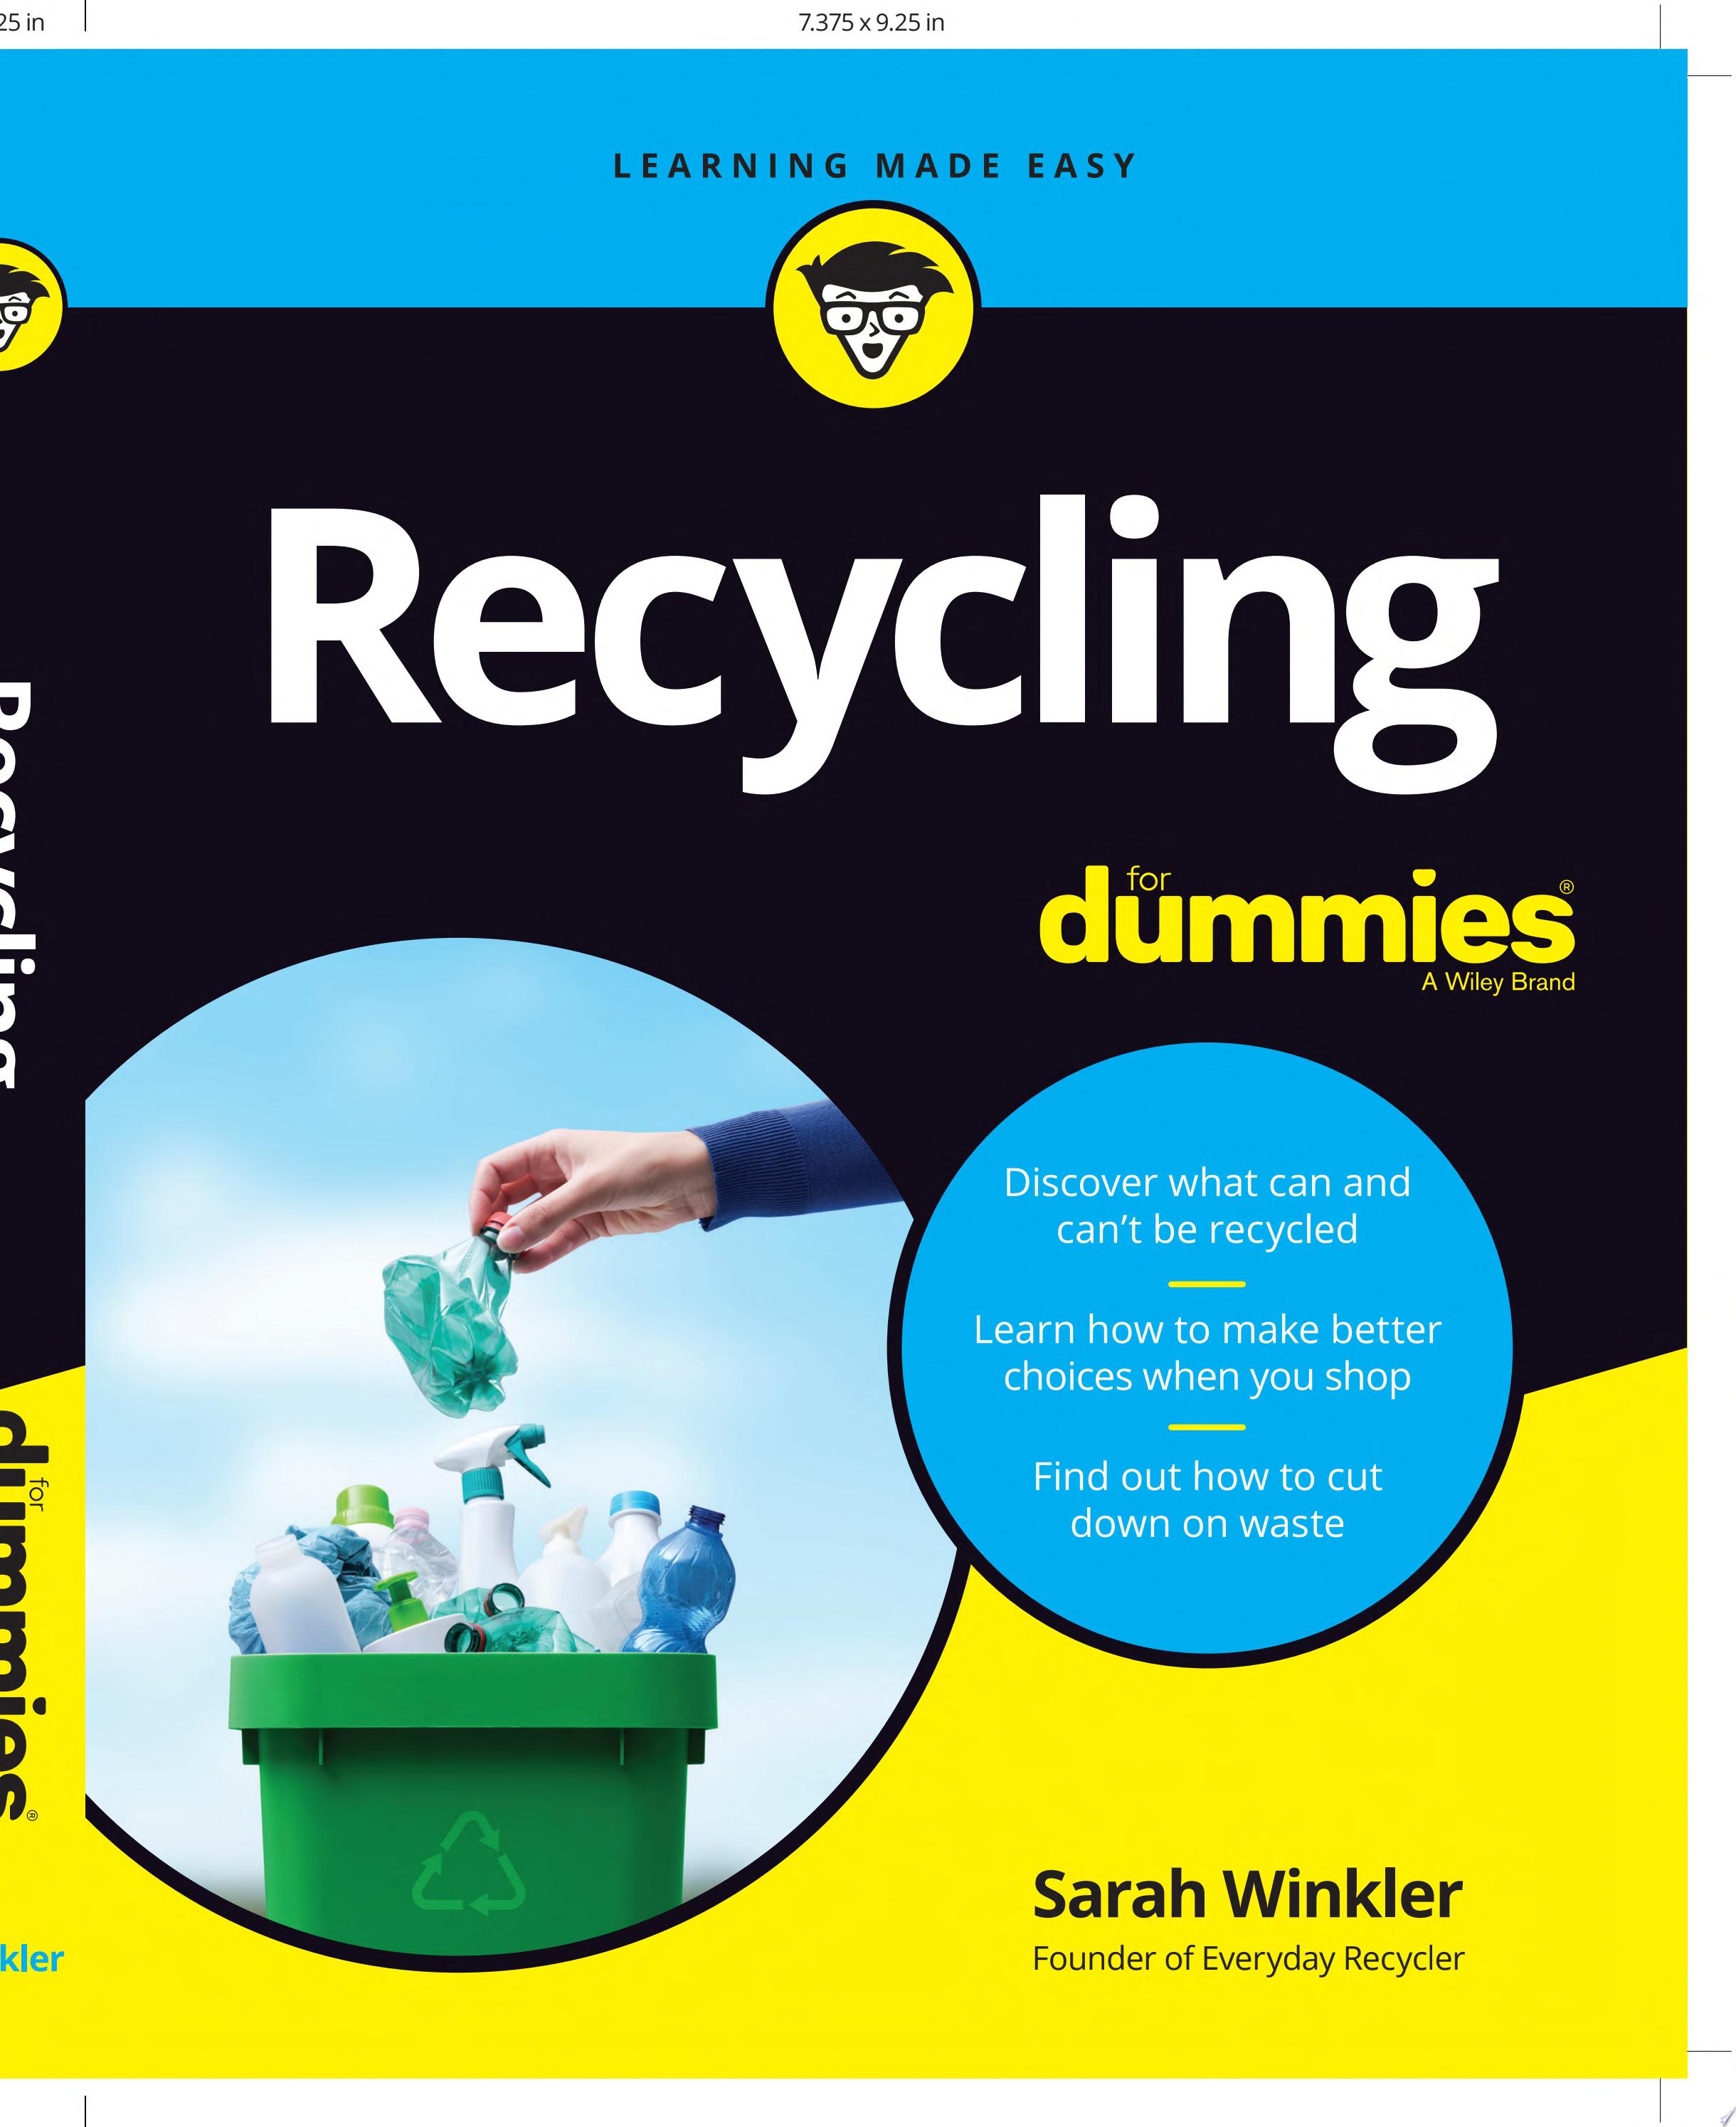 Image for "Recycling For Dummies"